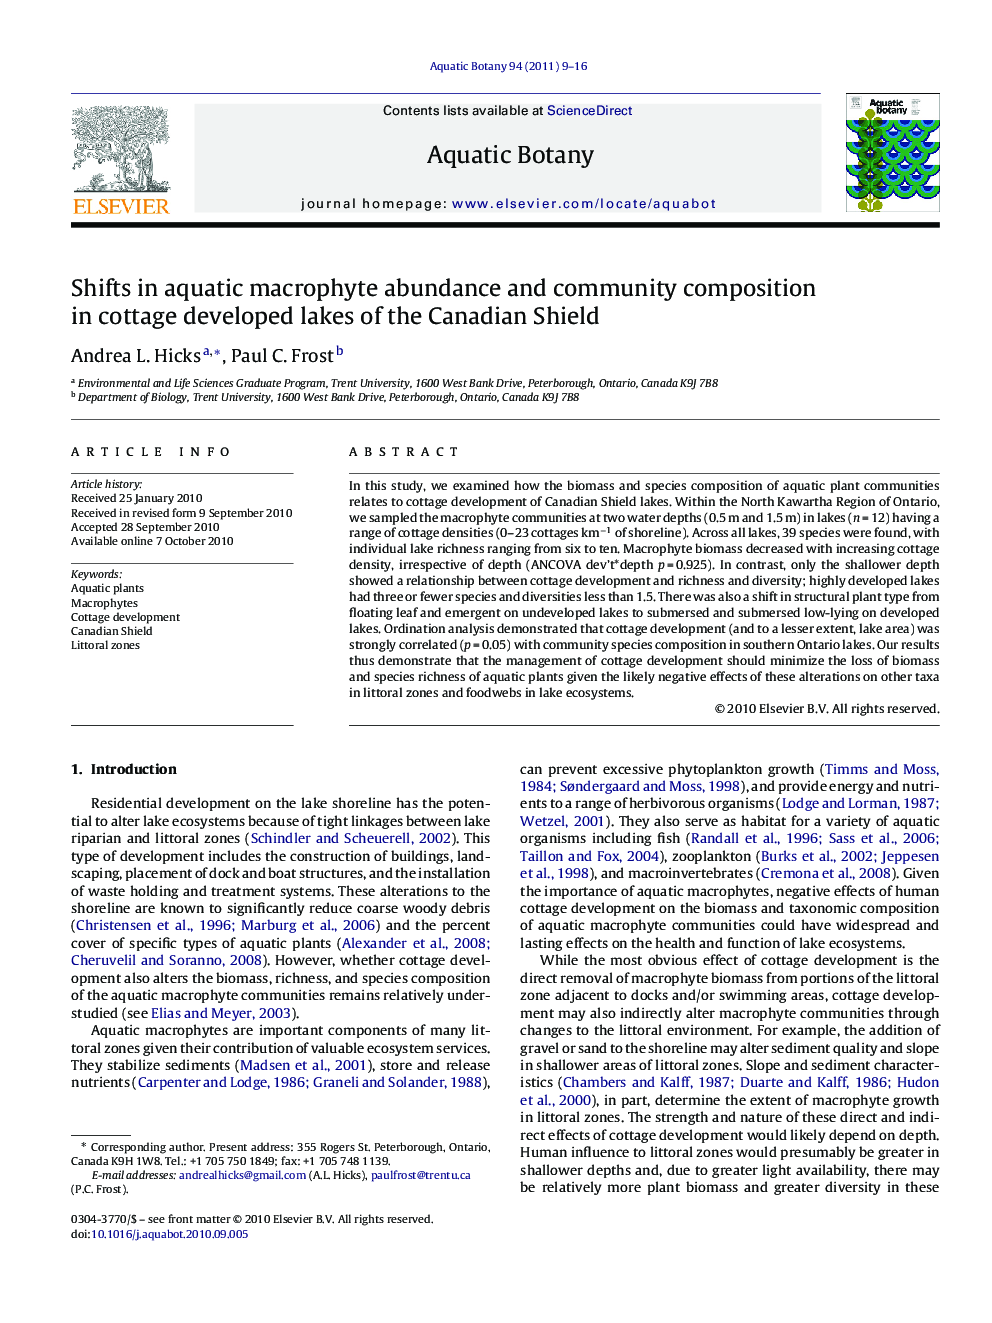 Shifts in aquatic macrophyte abundance and community composition in cottage developed lakes of the Canadian Shield